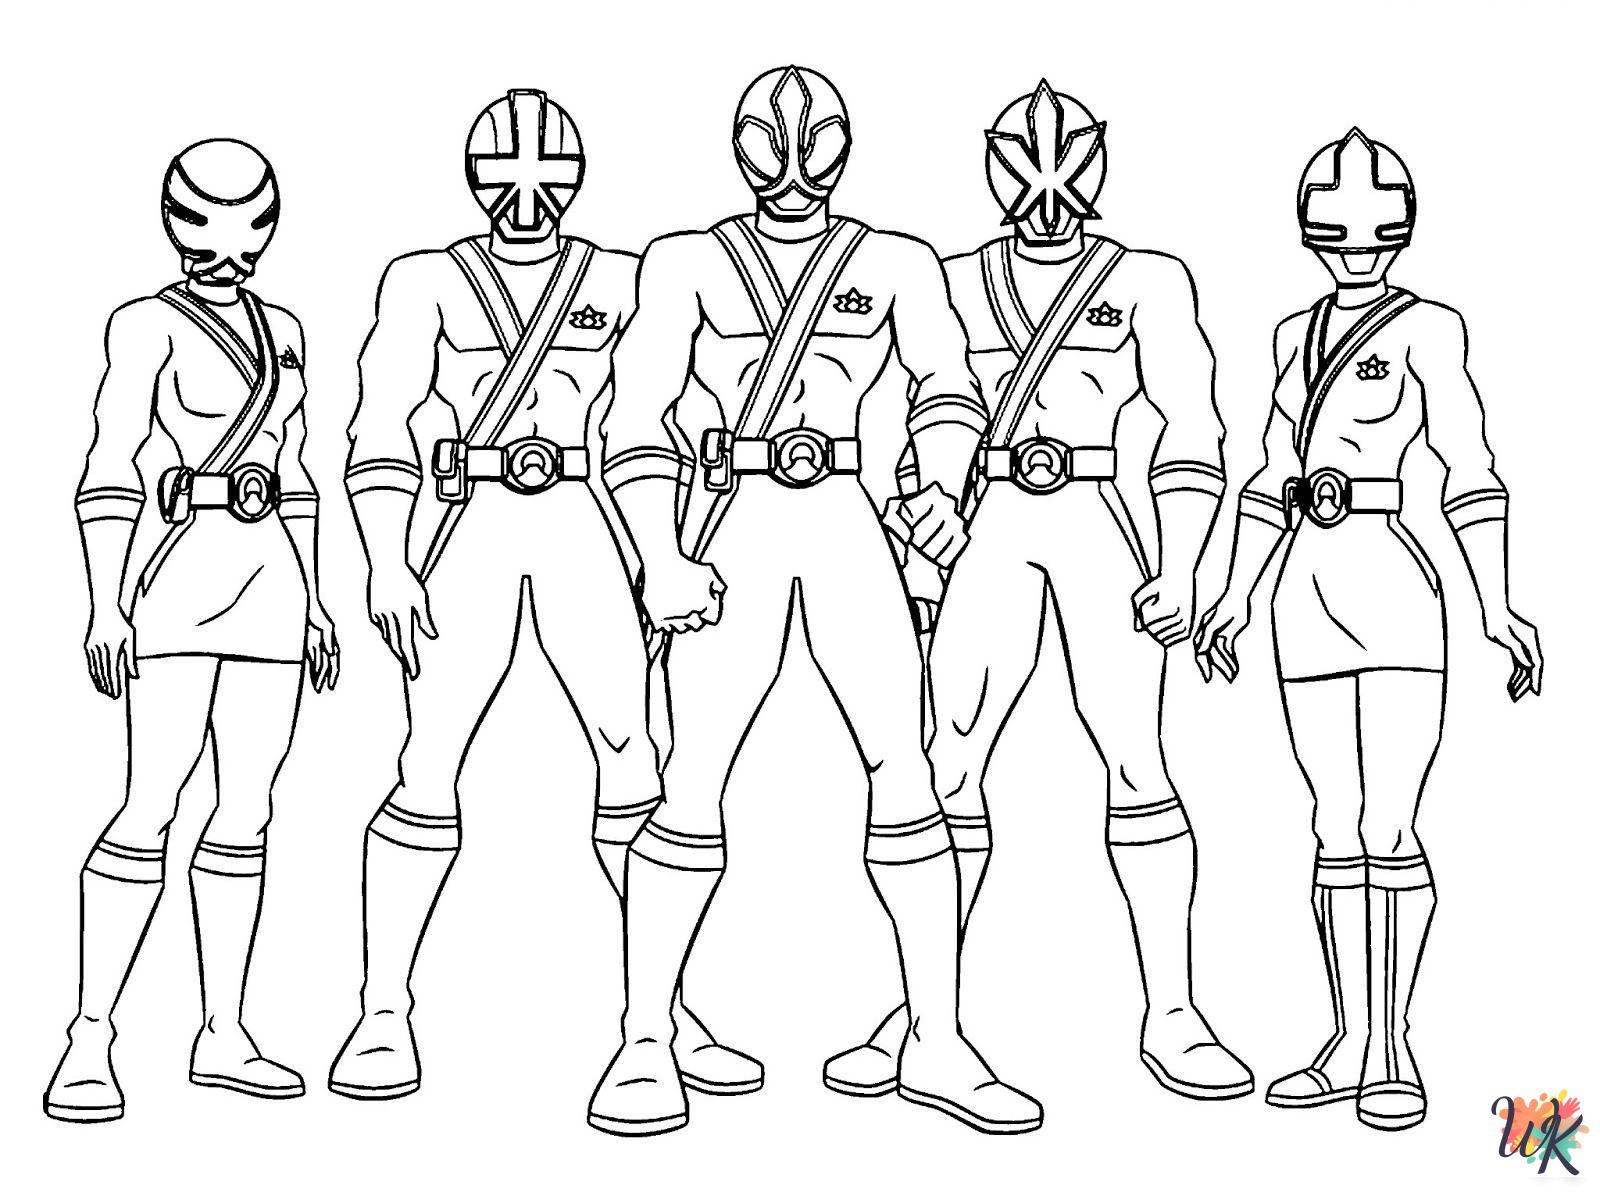 Power Rangers coloring pages pdf